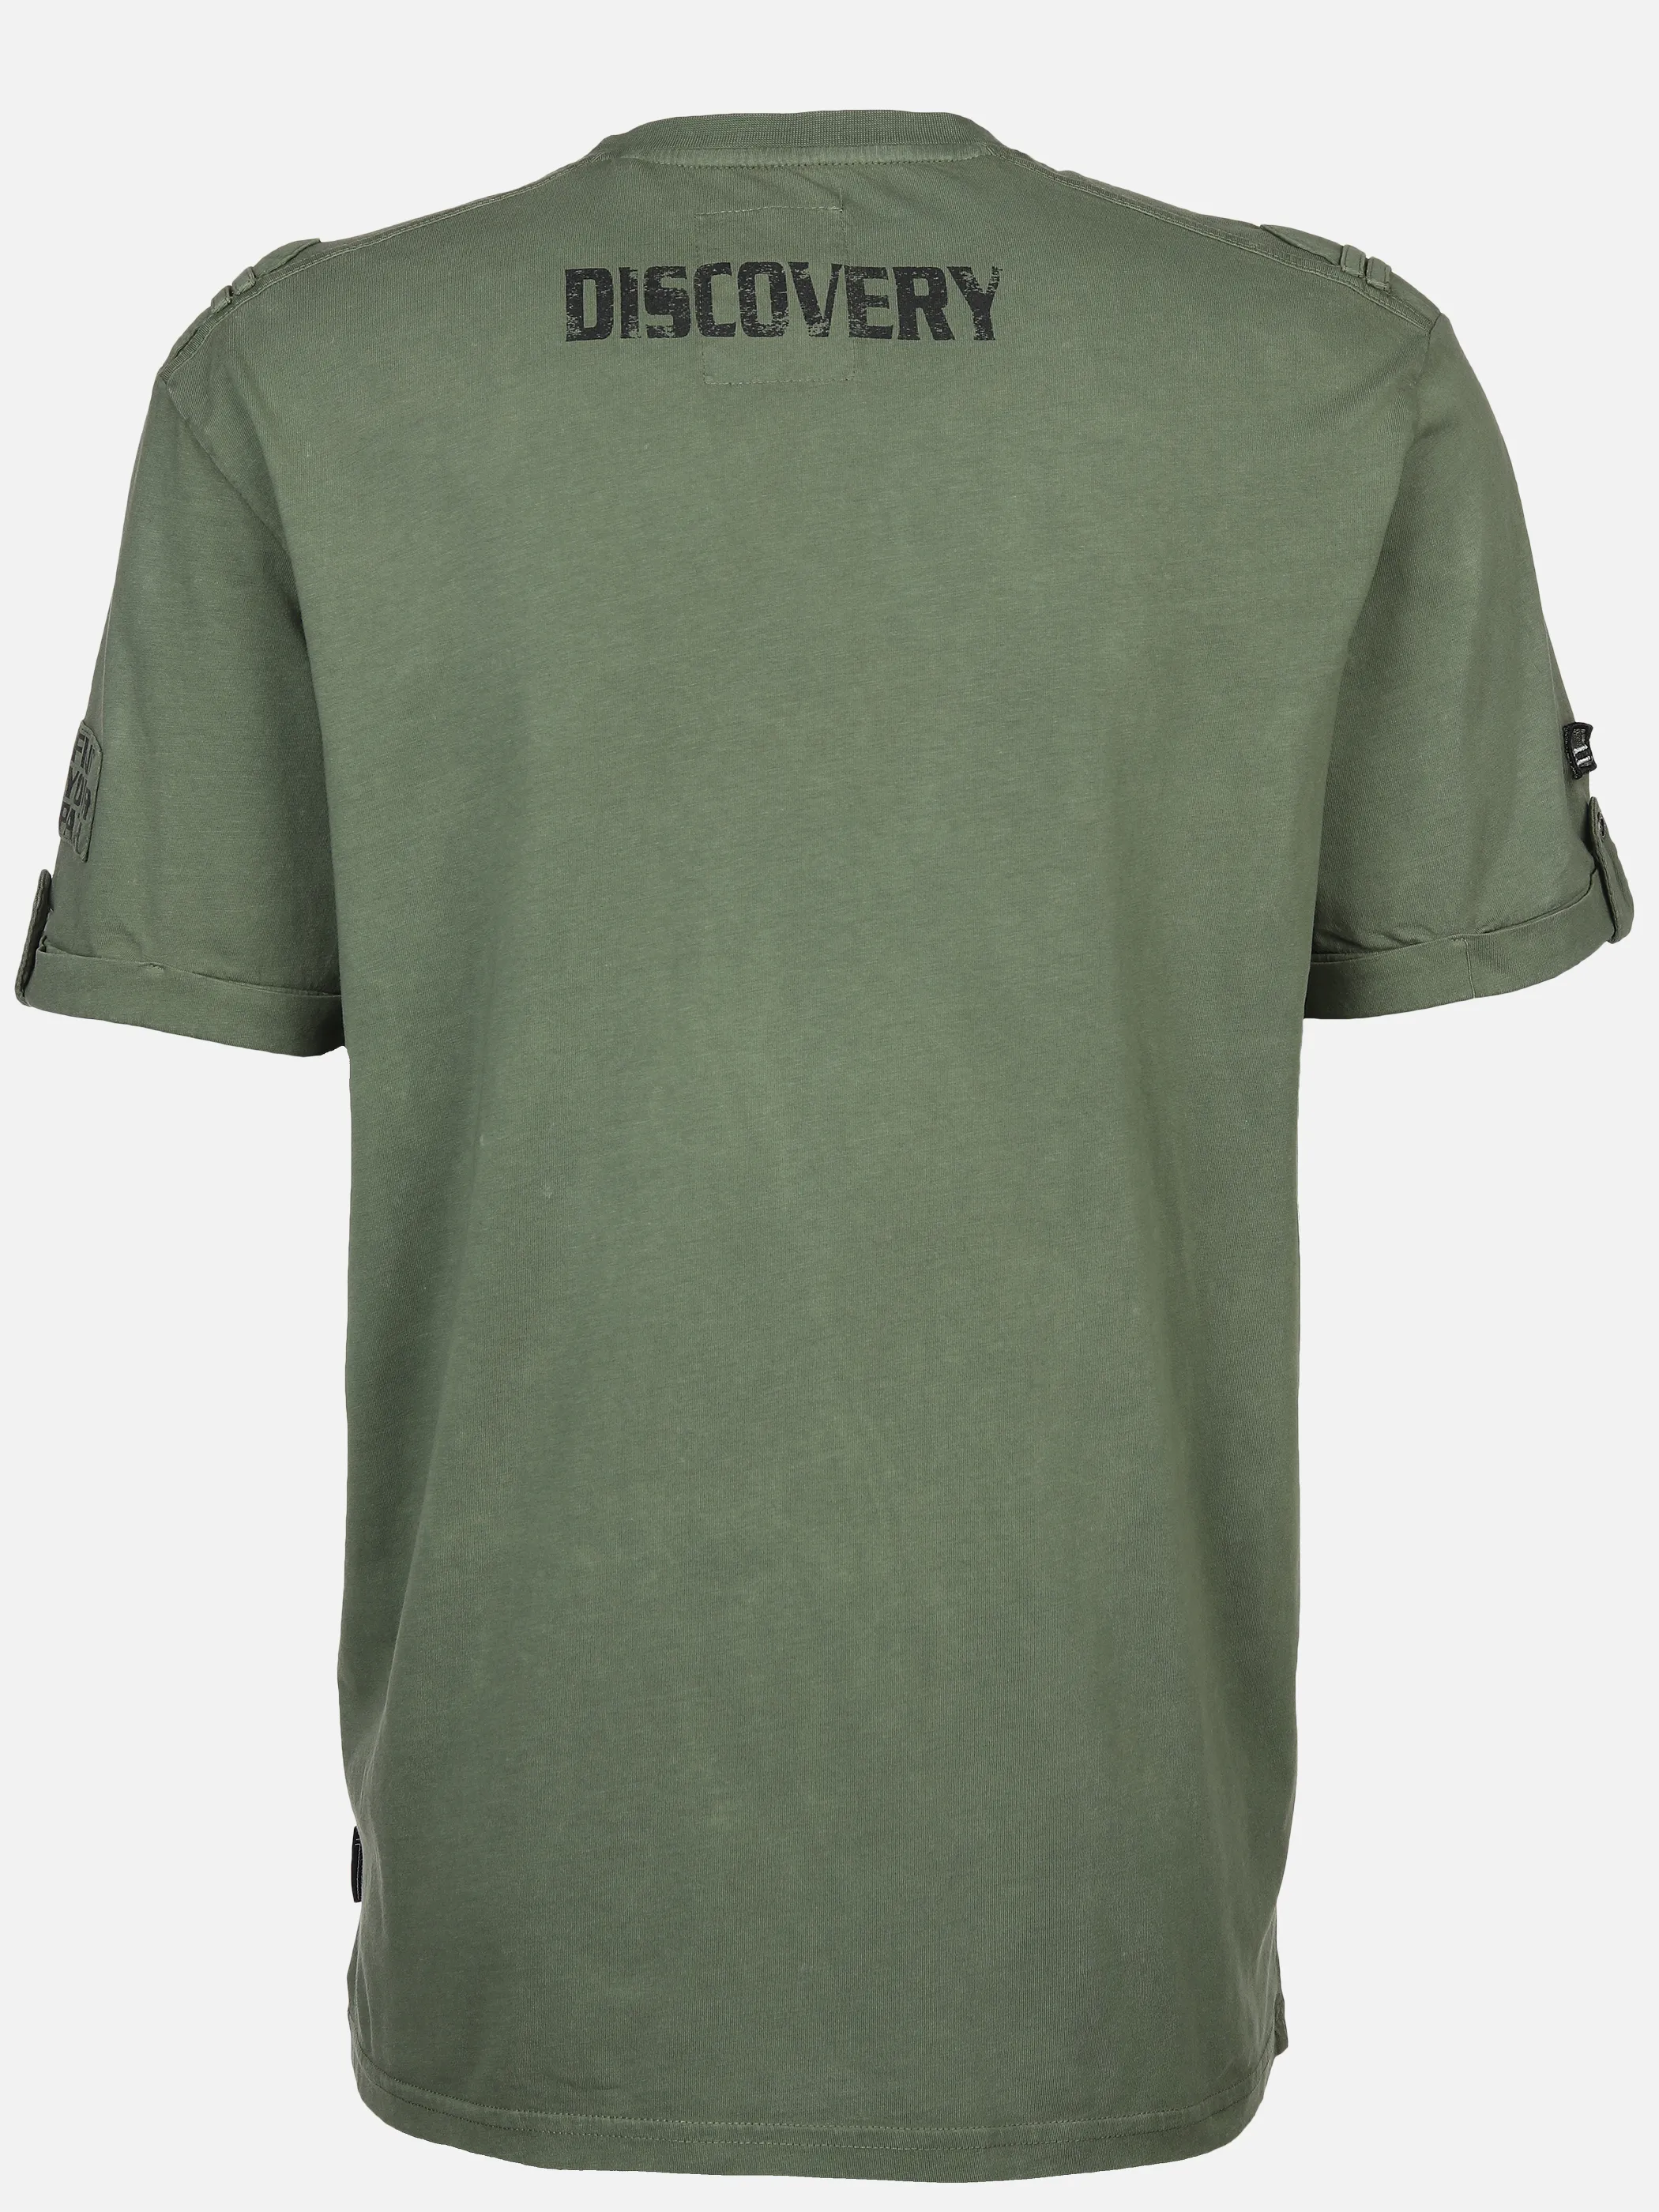 Southern Territory He. T-Shirt 1/2 Arm Cargo Oliv 893223 OLIVE 2